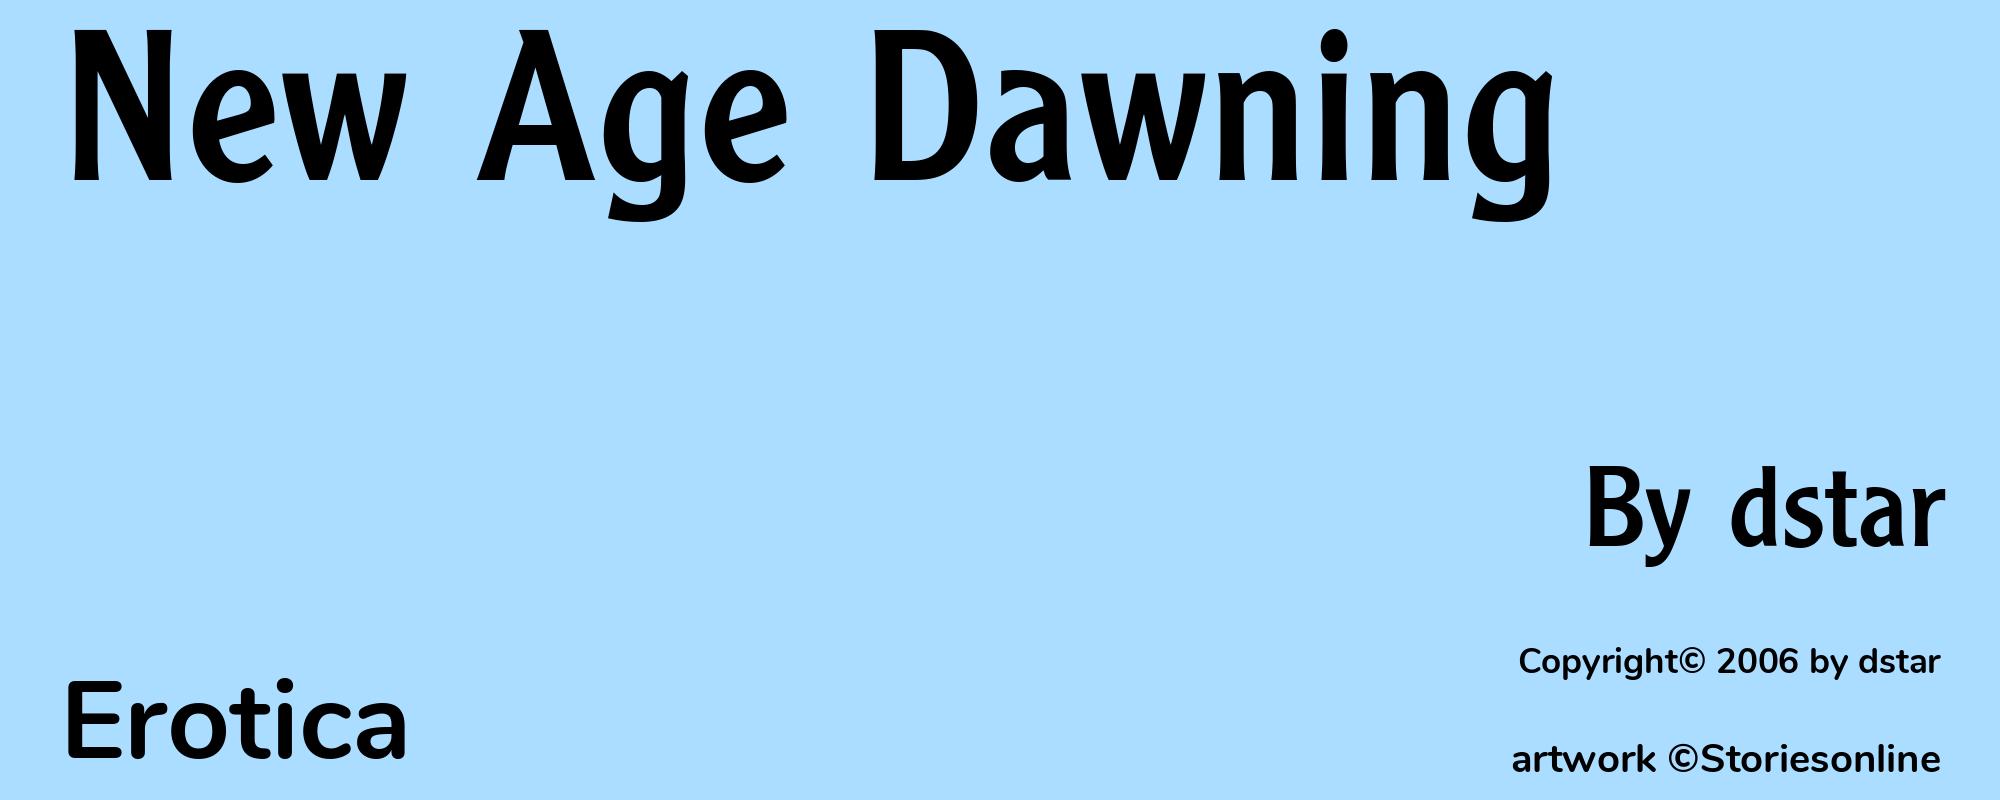 New Age Dawning - Cover